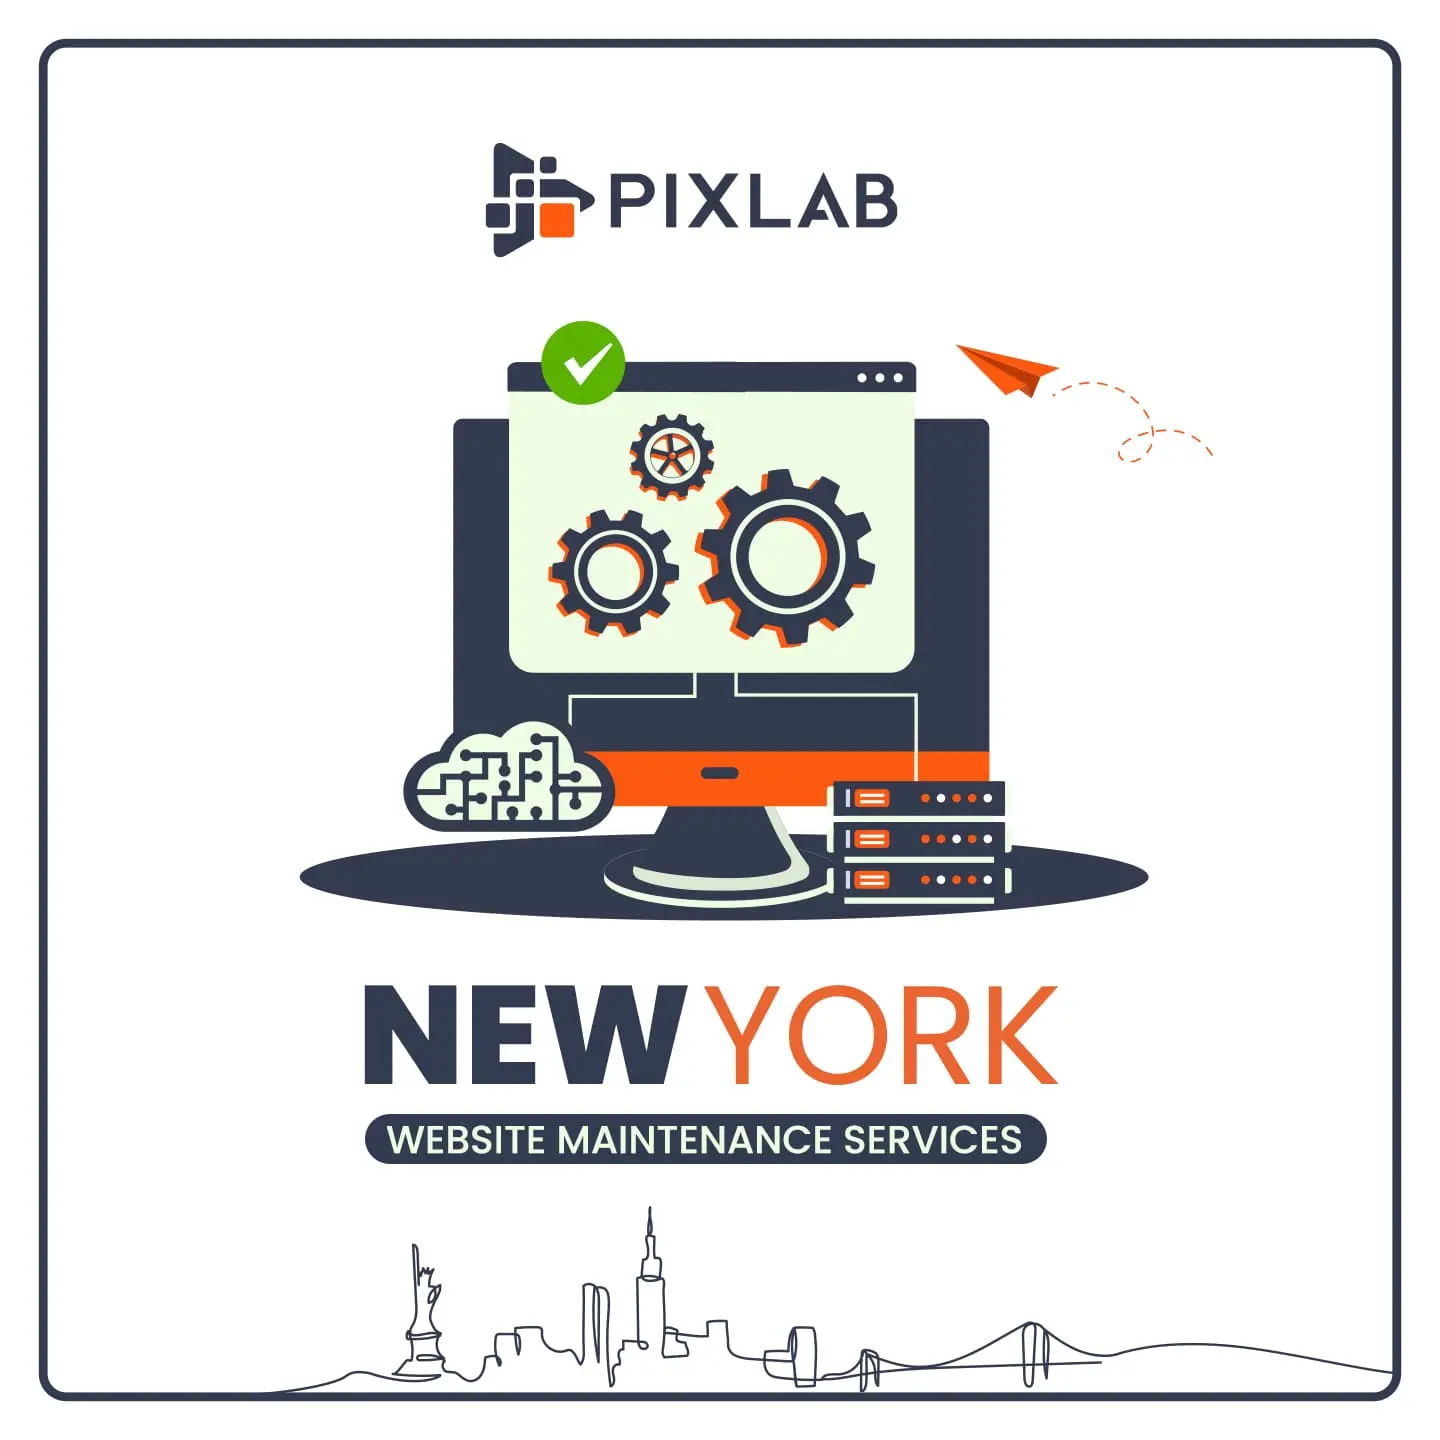 Pixlab Website Maintenance Services in New York - Keep Your Website Running Smoothly